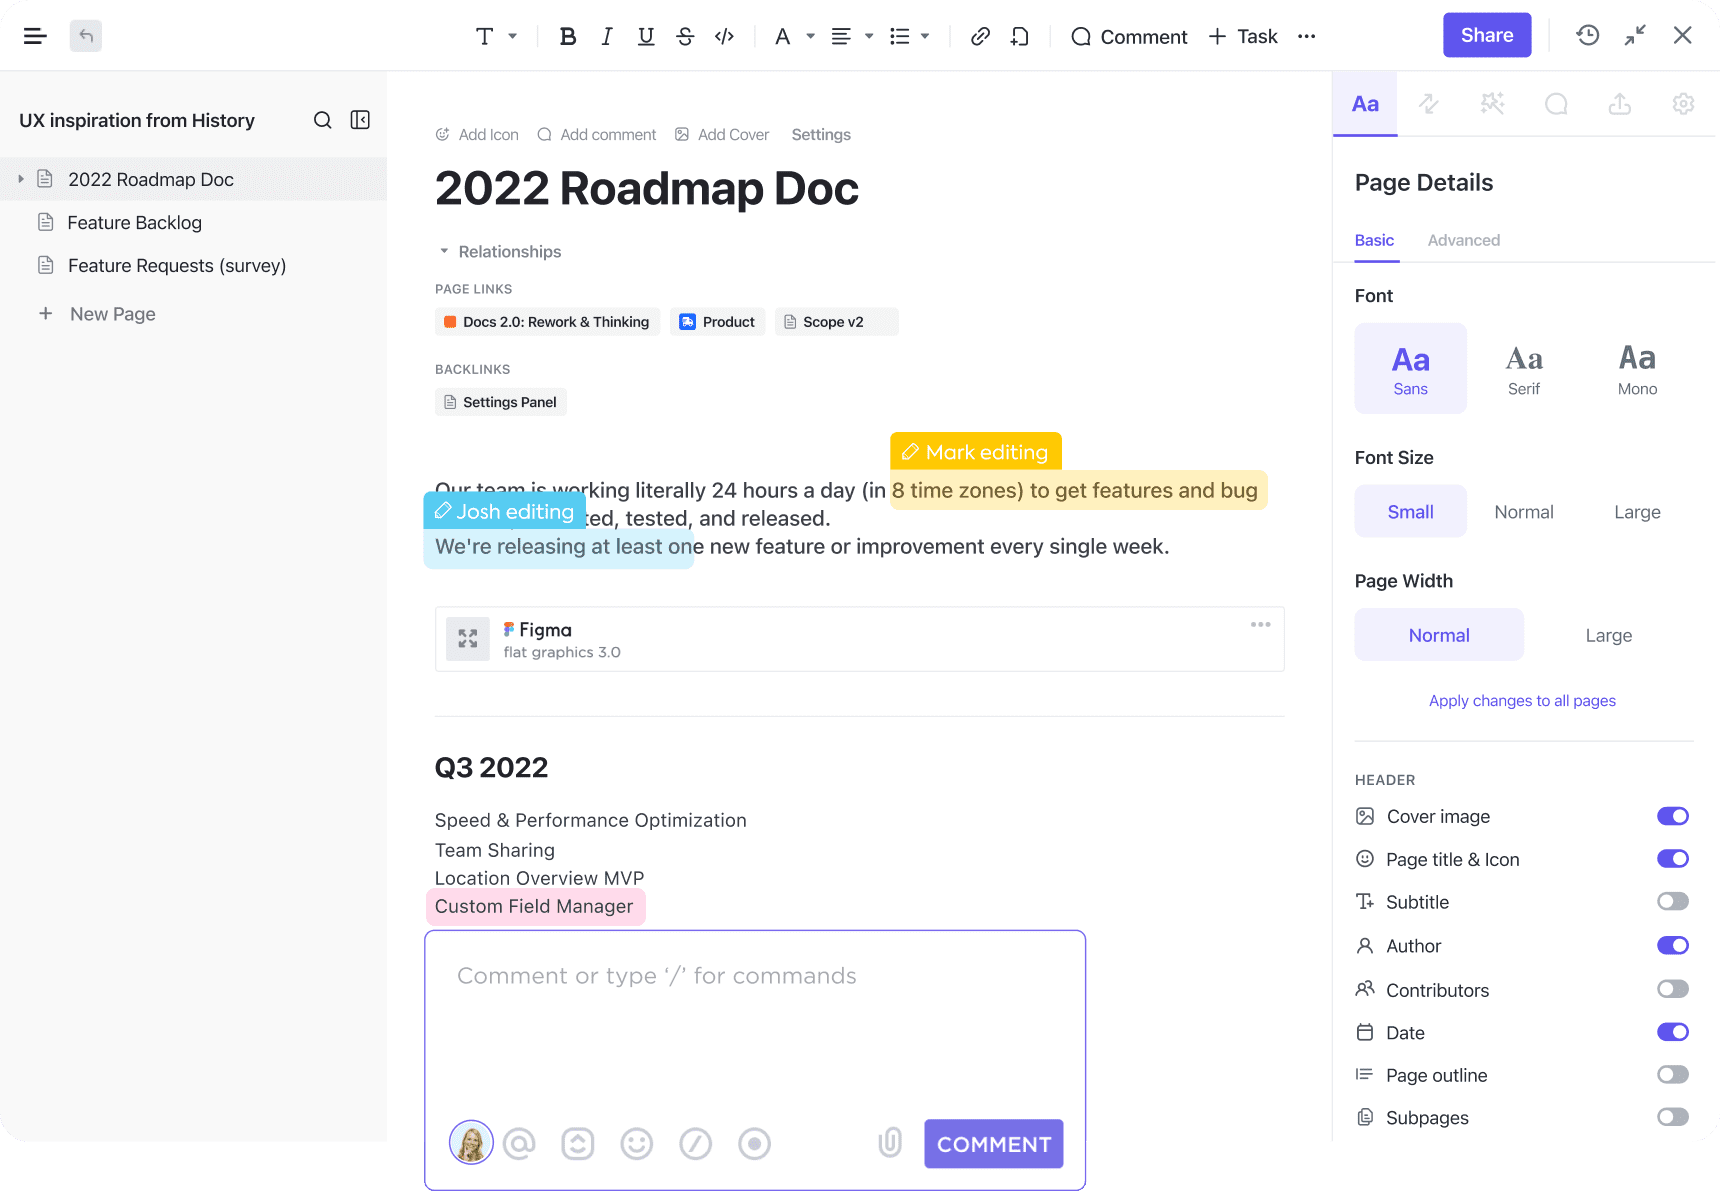 clickup docs. Whos content of the doc as well as 2 people actively editing the doc at the same time. on the right you see page details, font options, and toggles for header options such as a cover image, subtitle, author, date, etc.